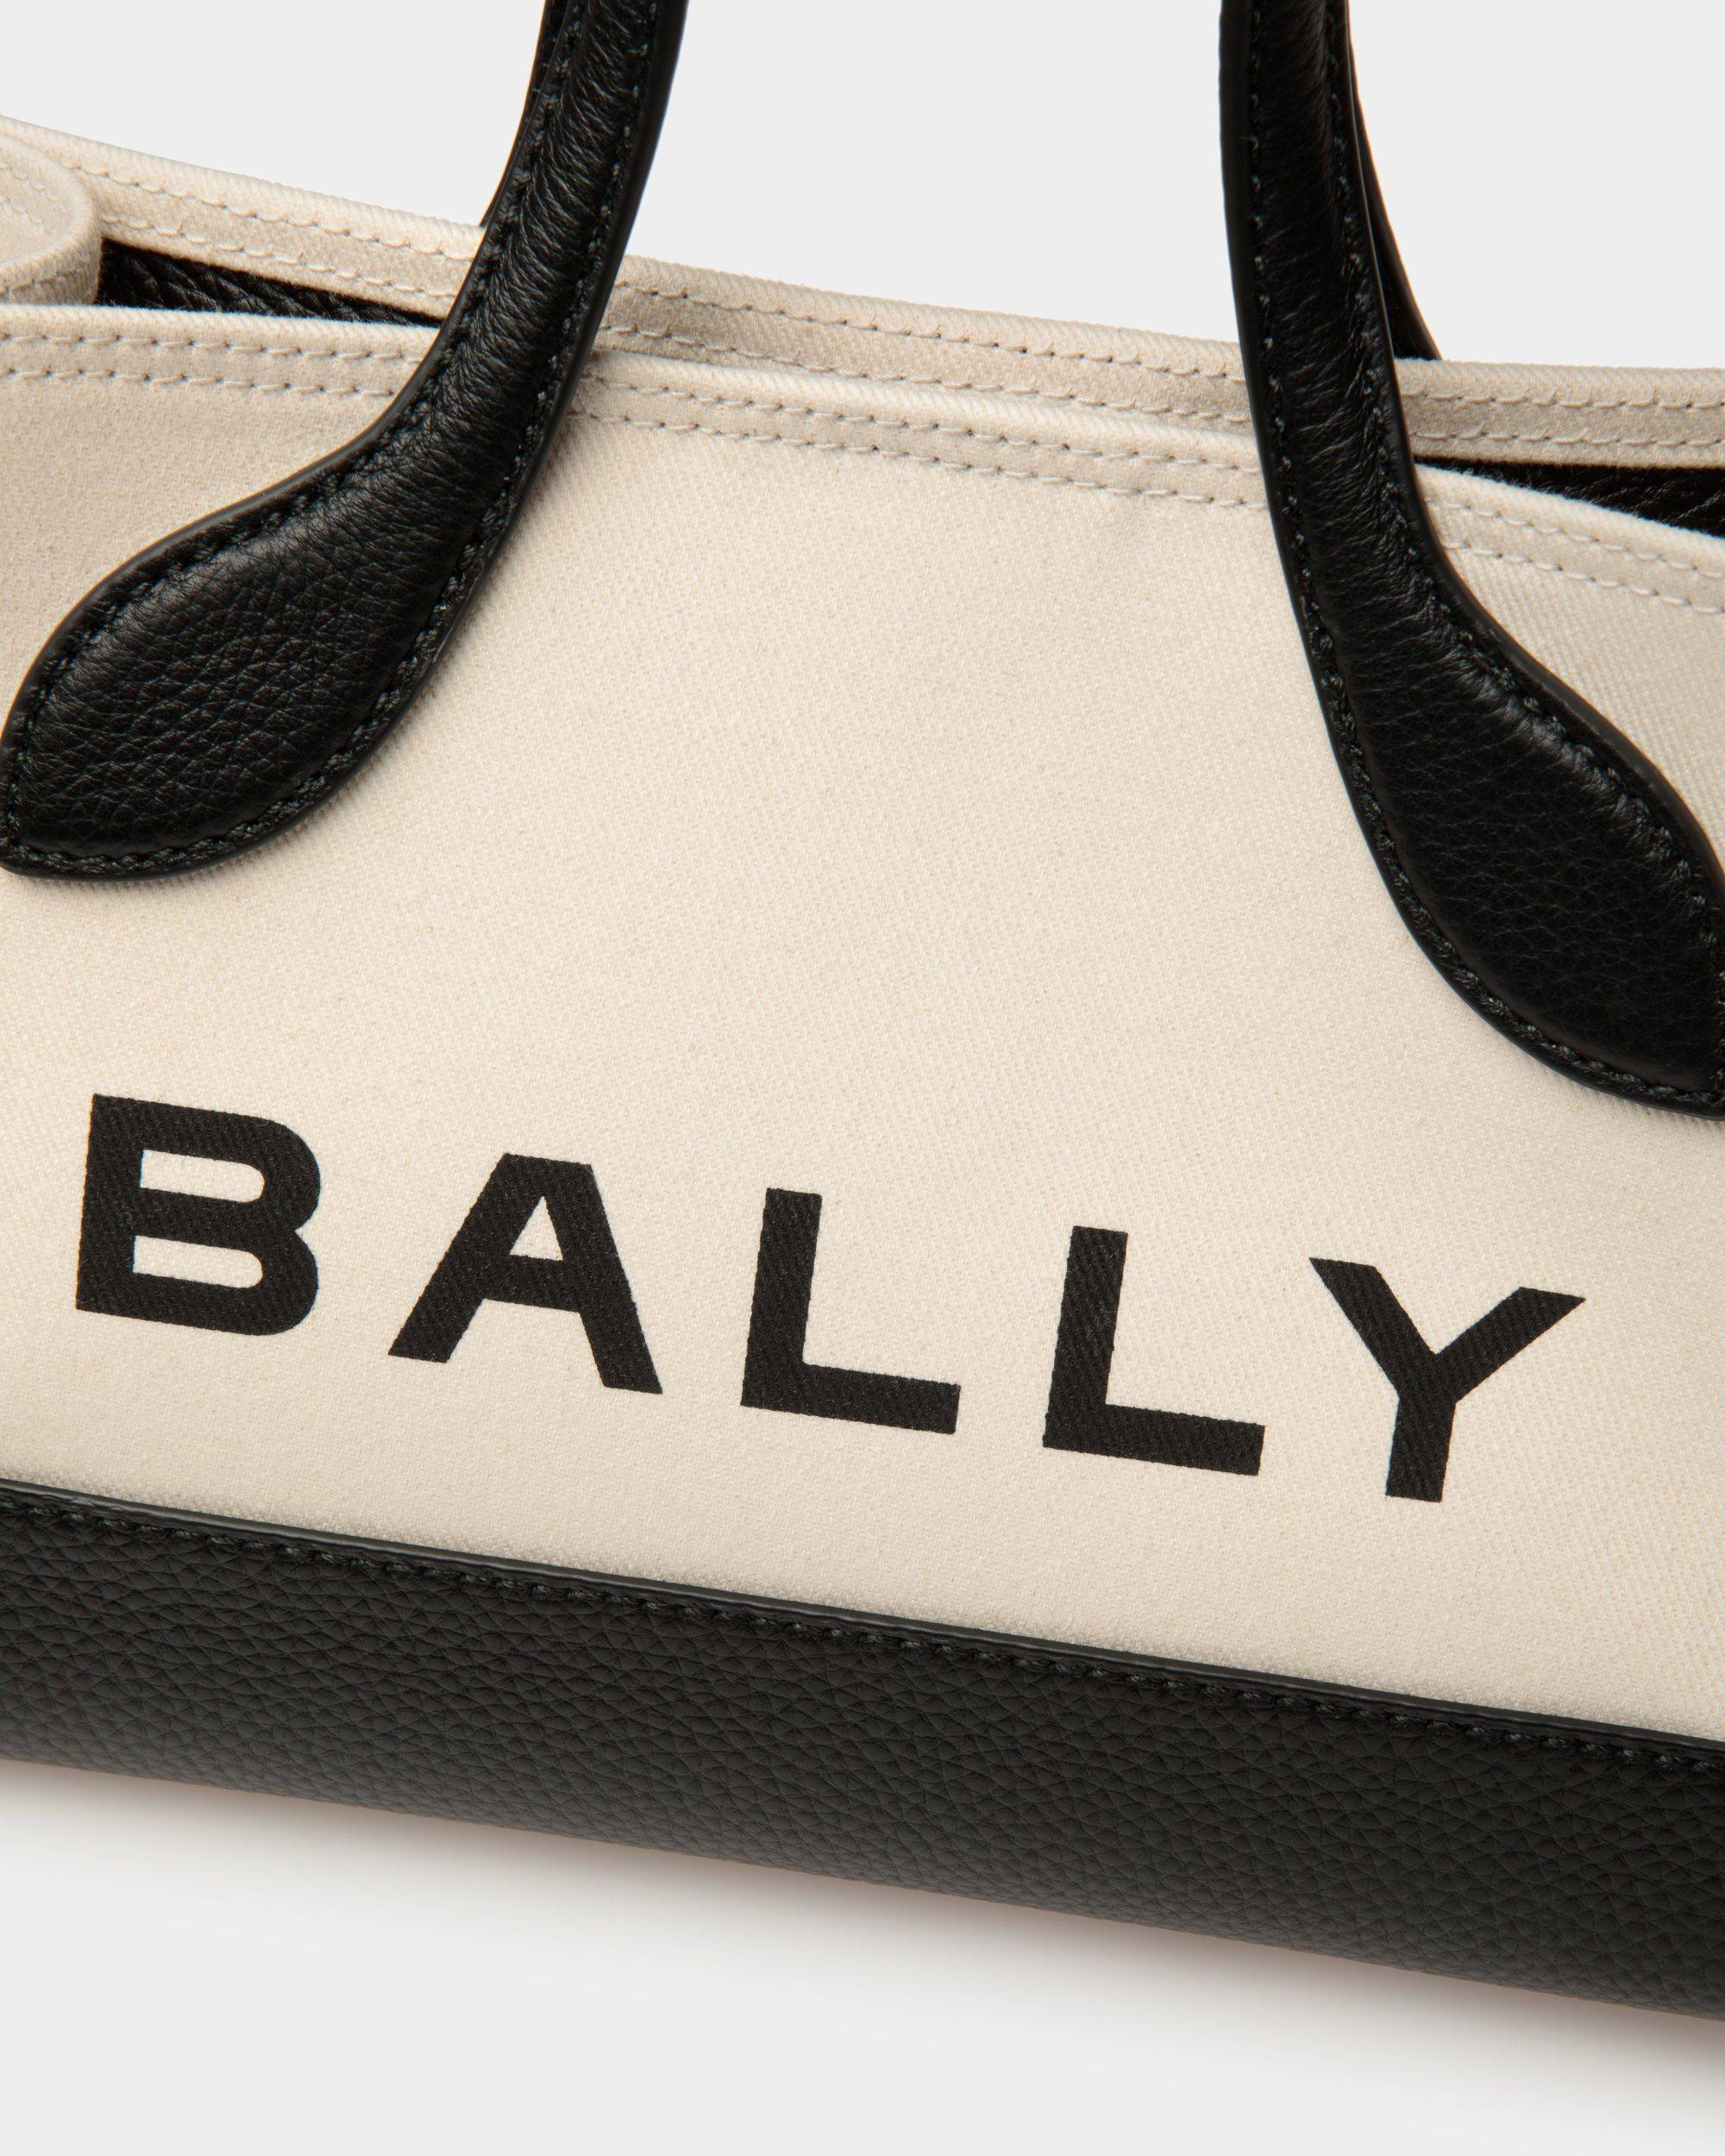 Keep On Extra Small | Women's Minibag | Natural And Black Fabric | Bally | Still Life Detail